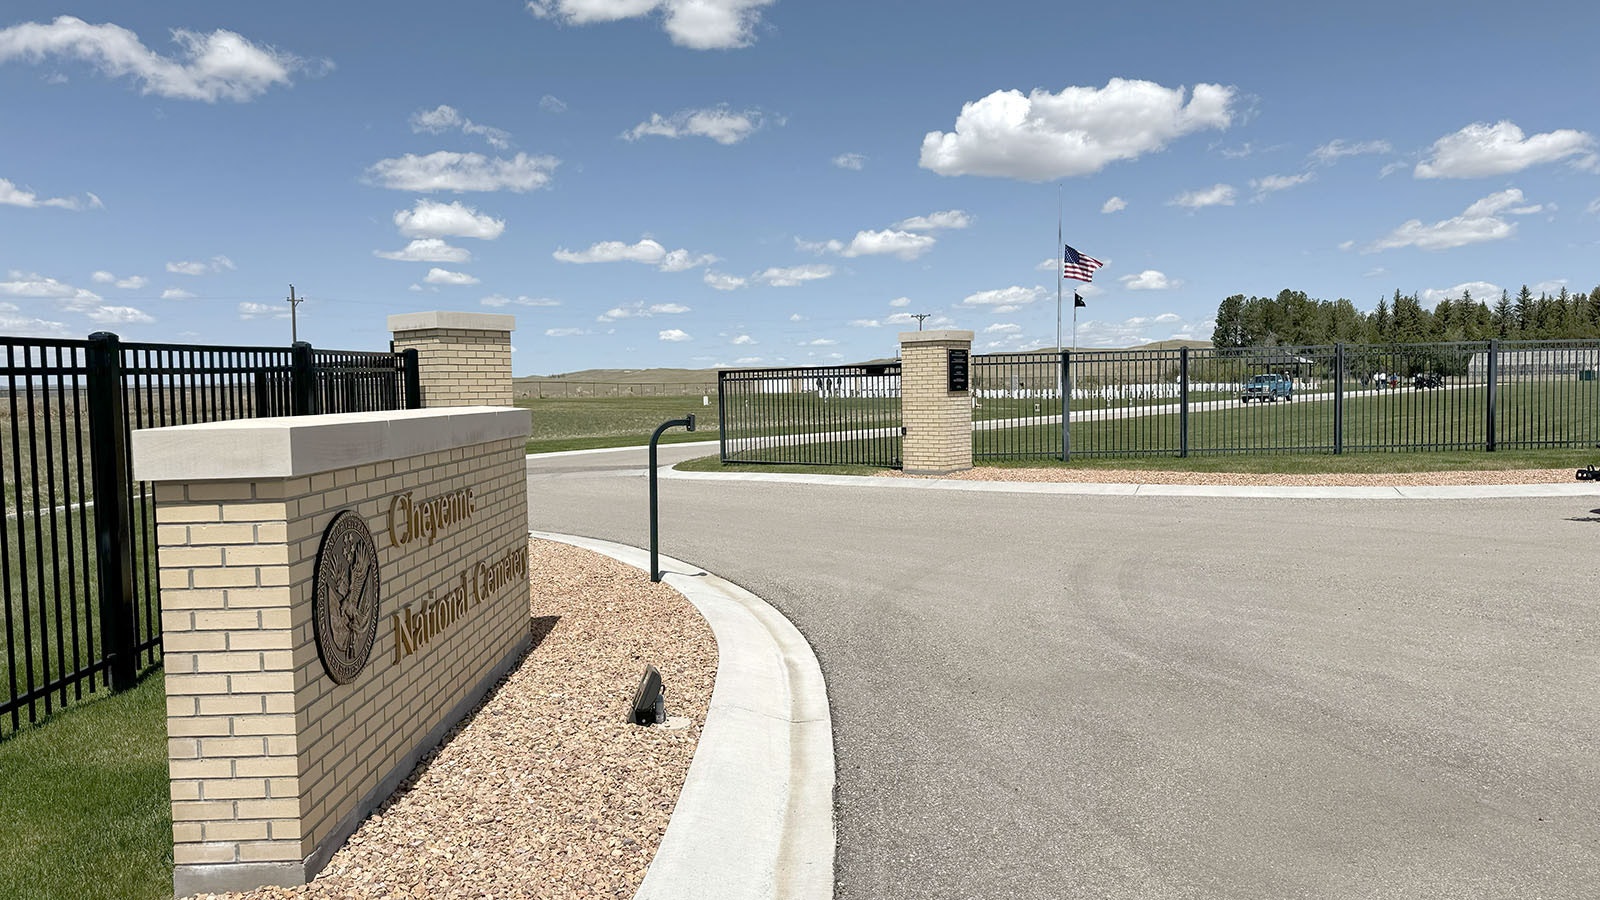 The Cheyenne National Cemetery, which is run by the U.S. Veterans Administration, is a 5-acre site located off Happy Jack Road, and dedicated in October 2020.